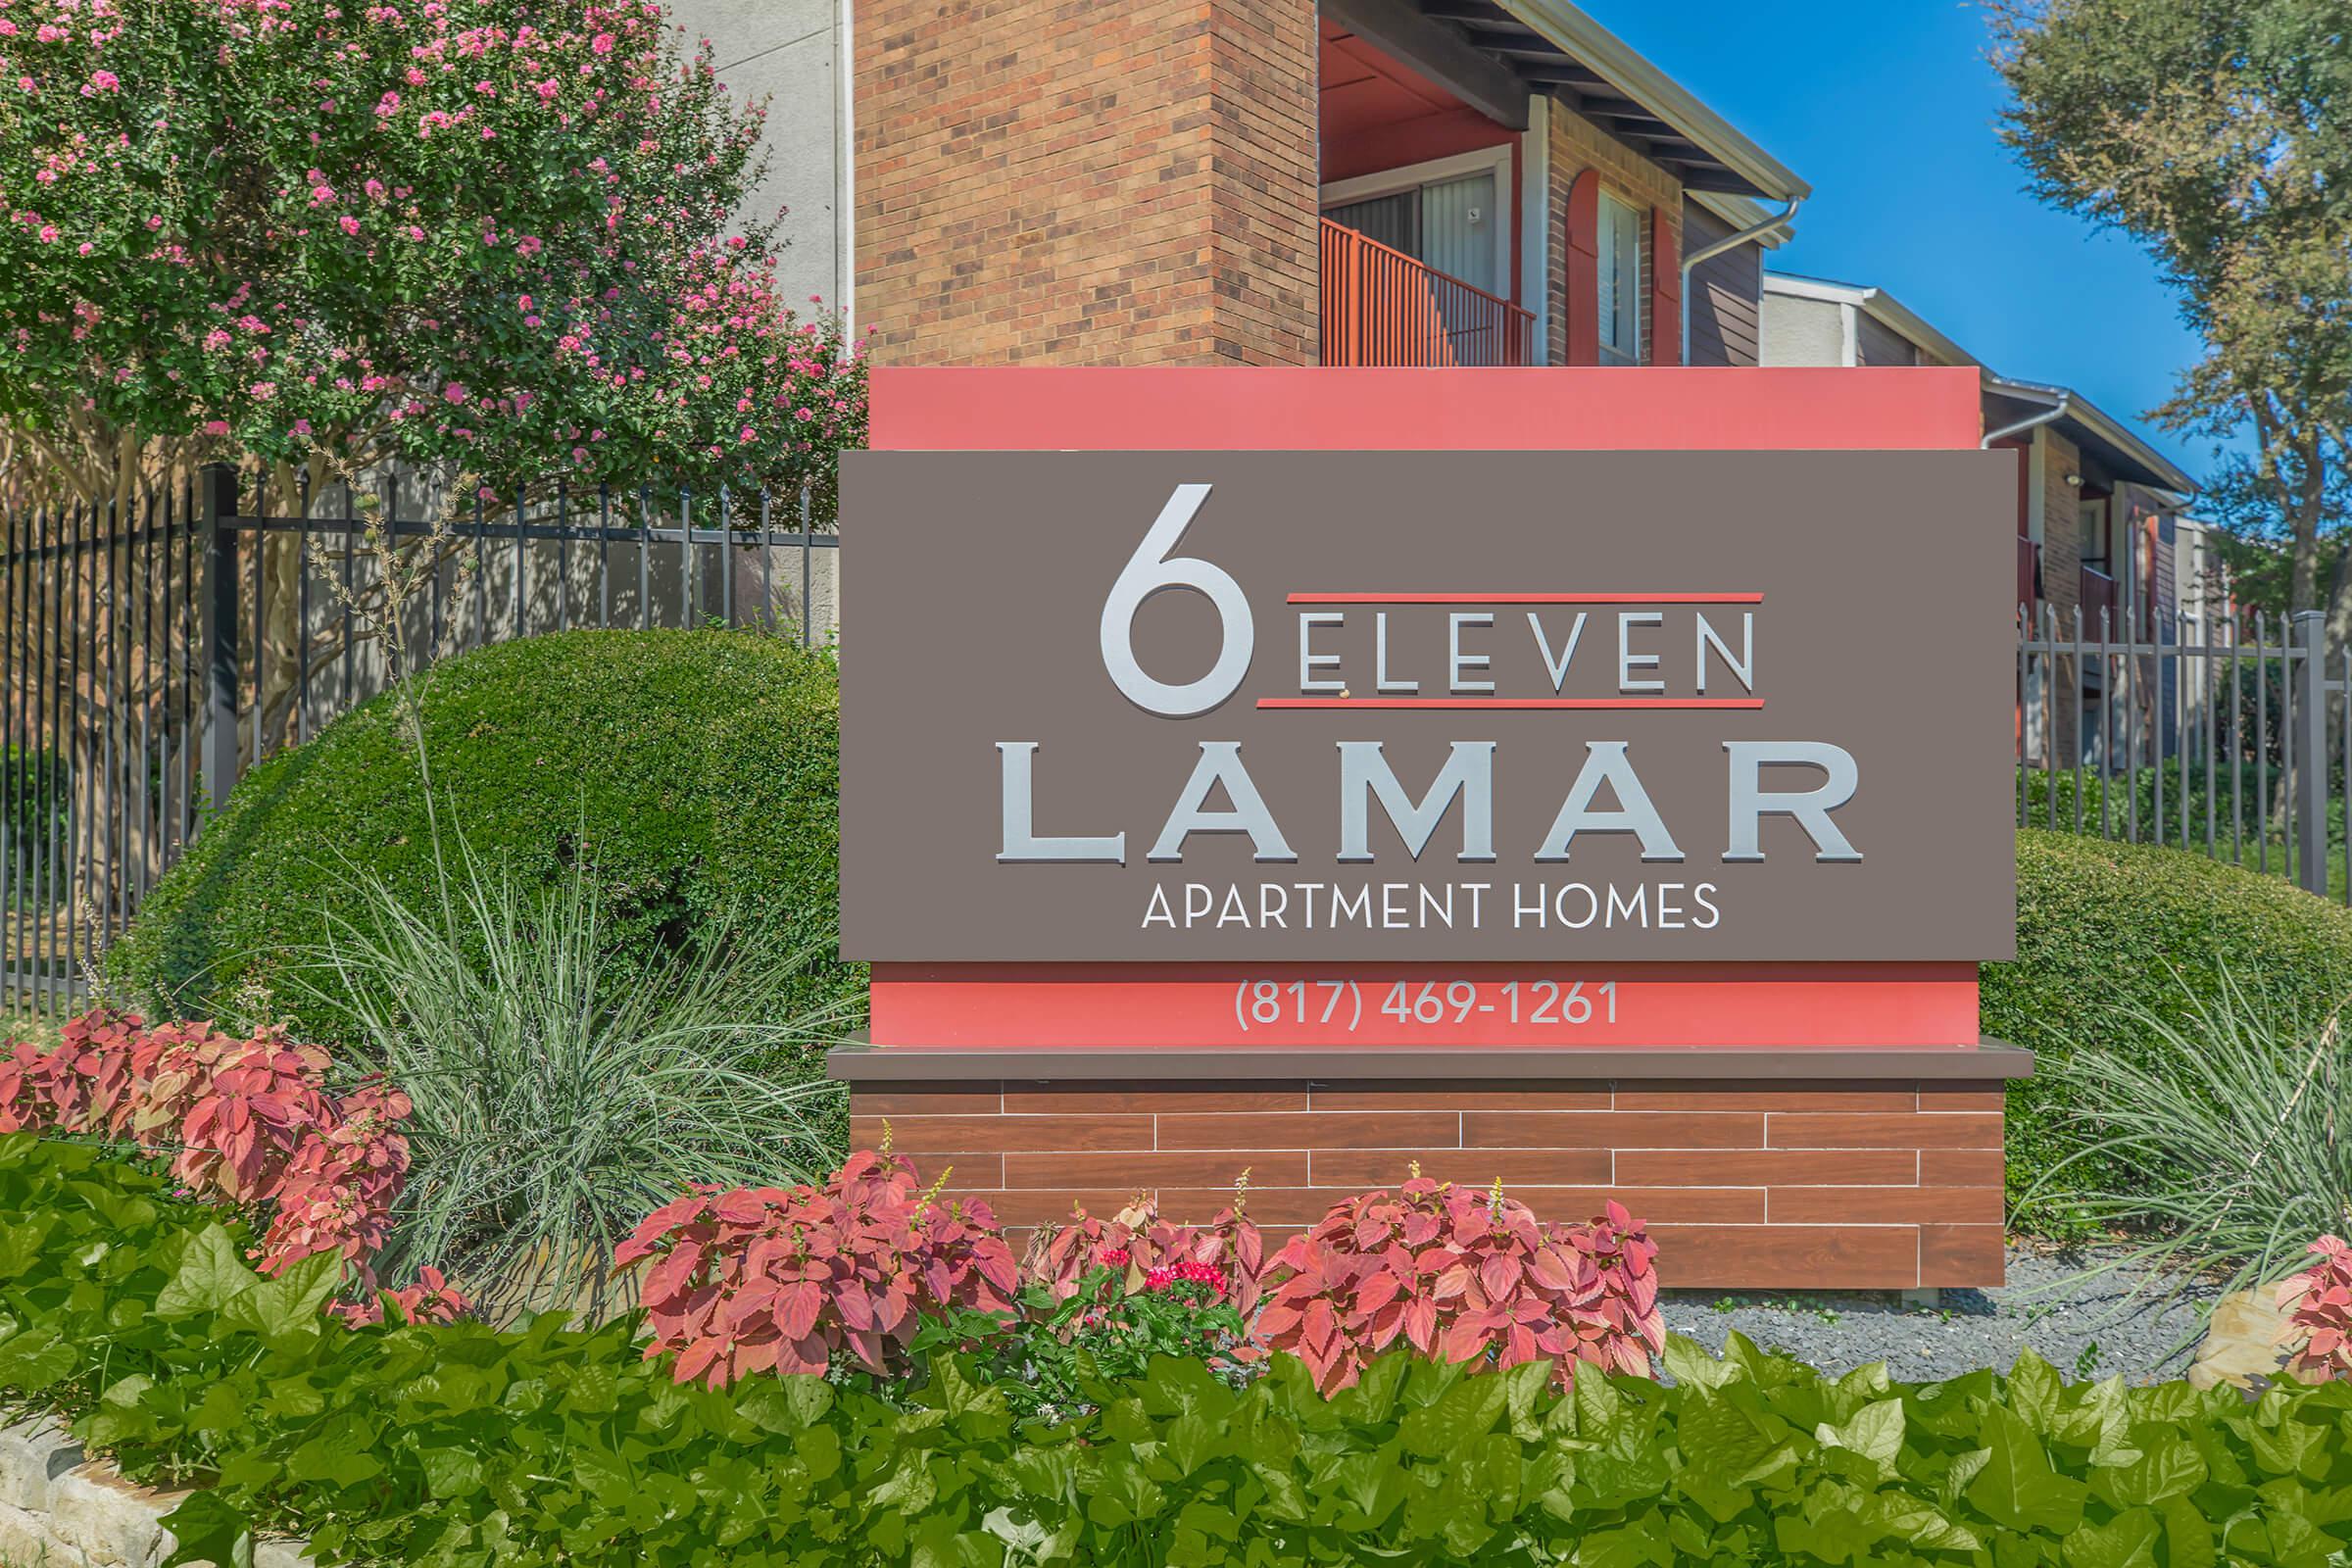 CONTACT 6 ELEVEN LAMAR TODAY